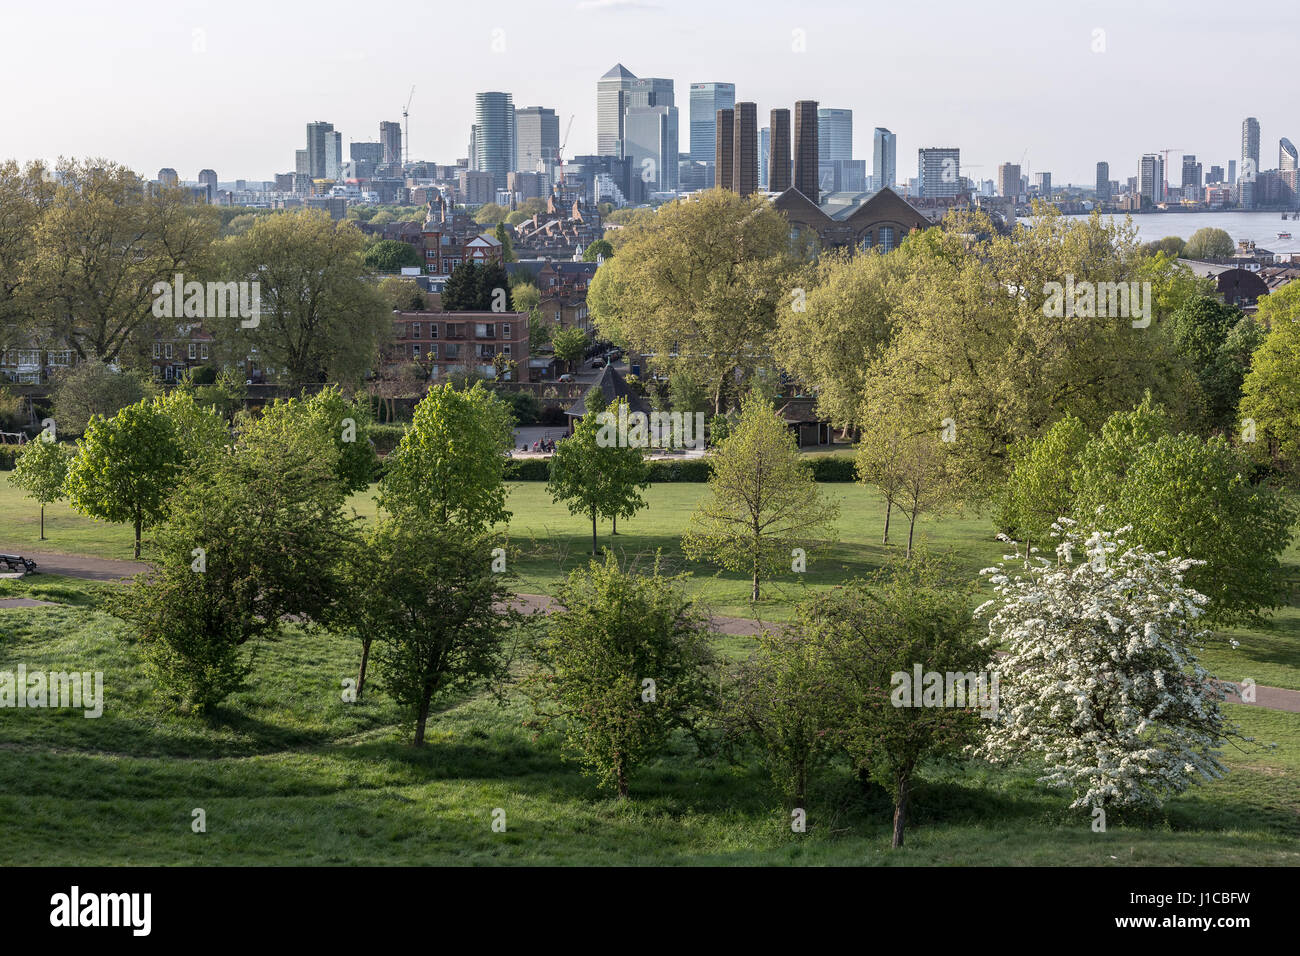 Canary Wharf financial centre business buildings seen from Greenwich Park, London, UK. Stock Photo